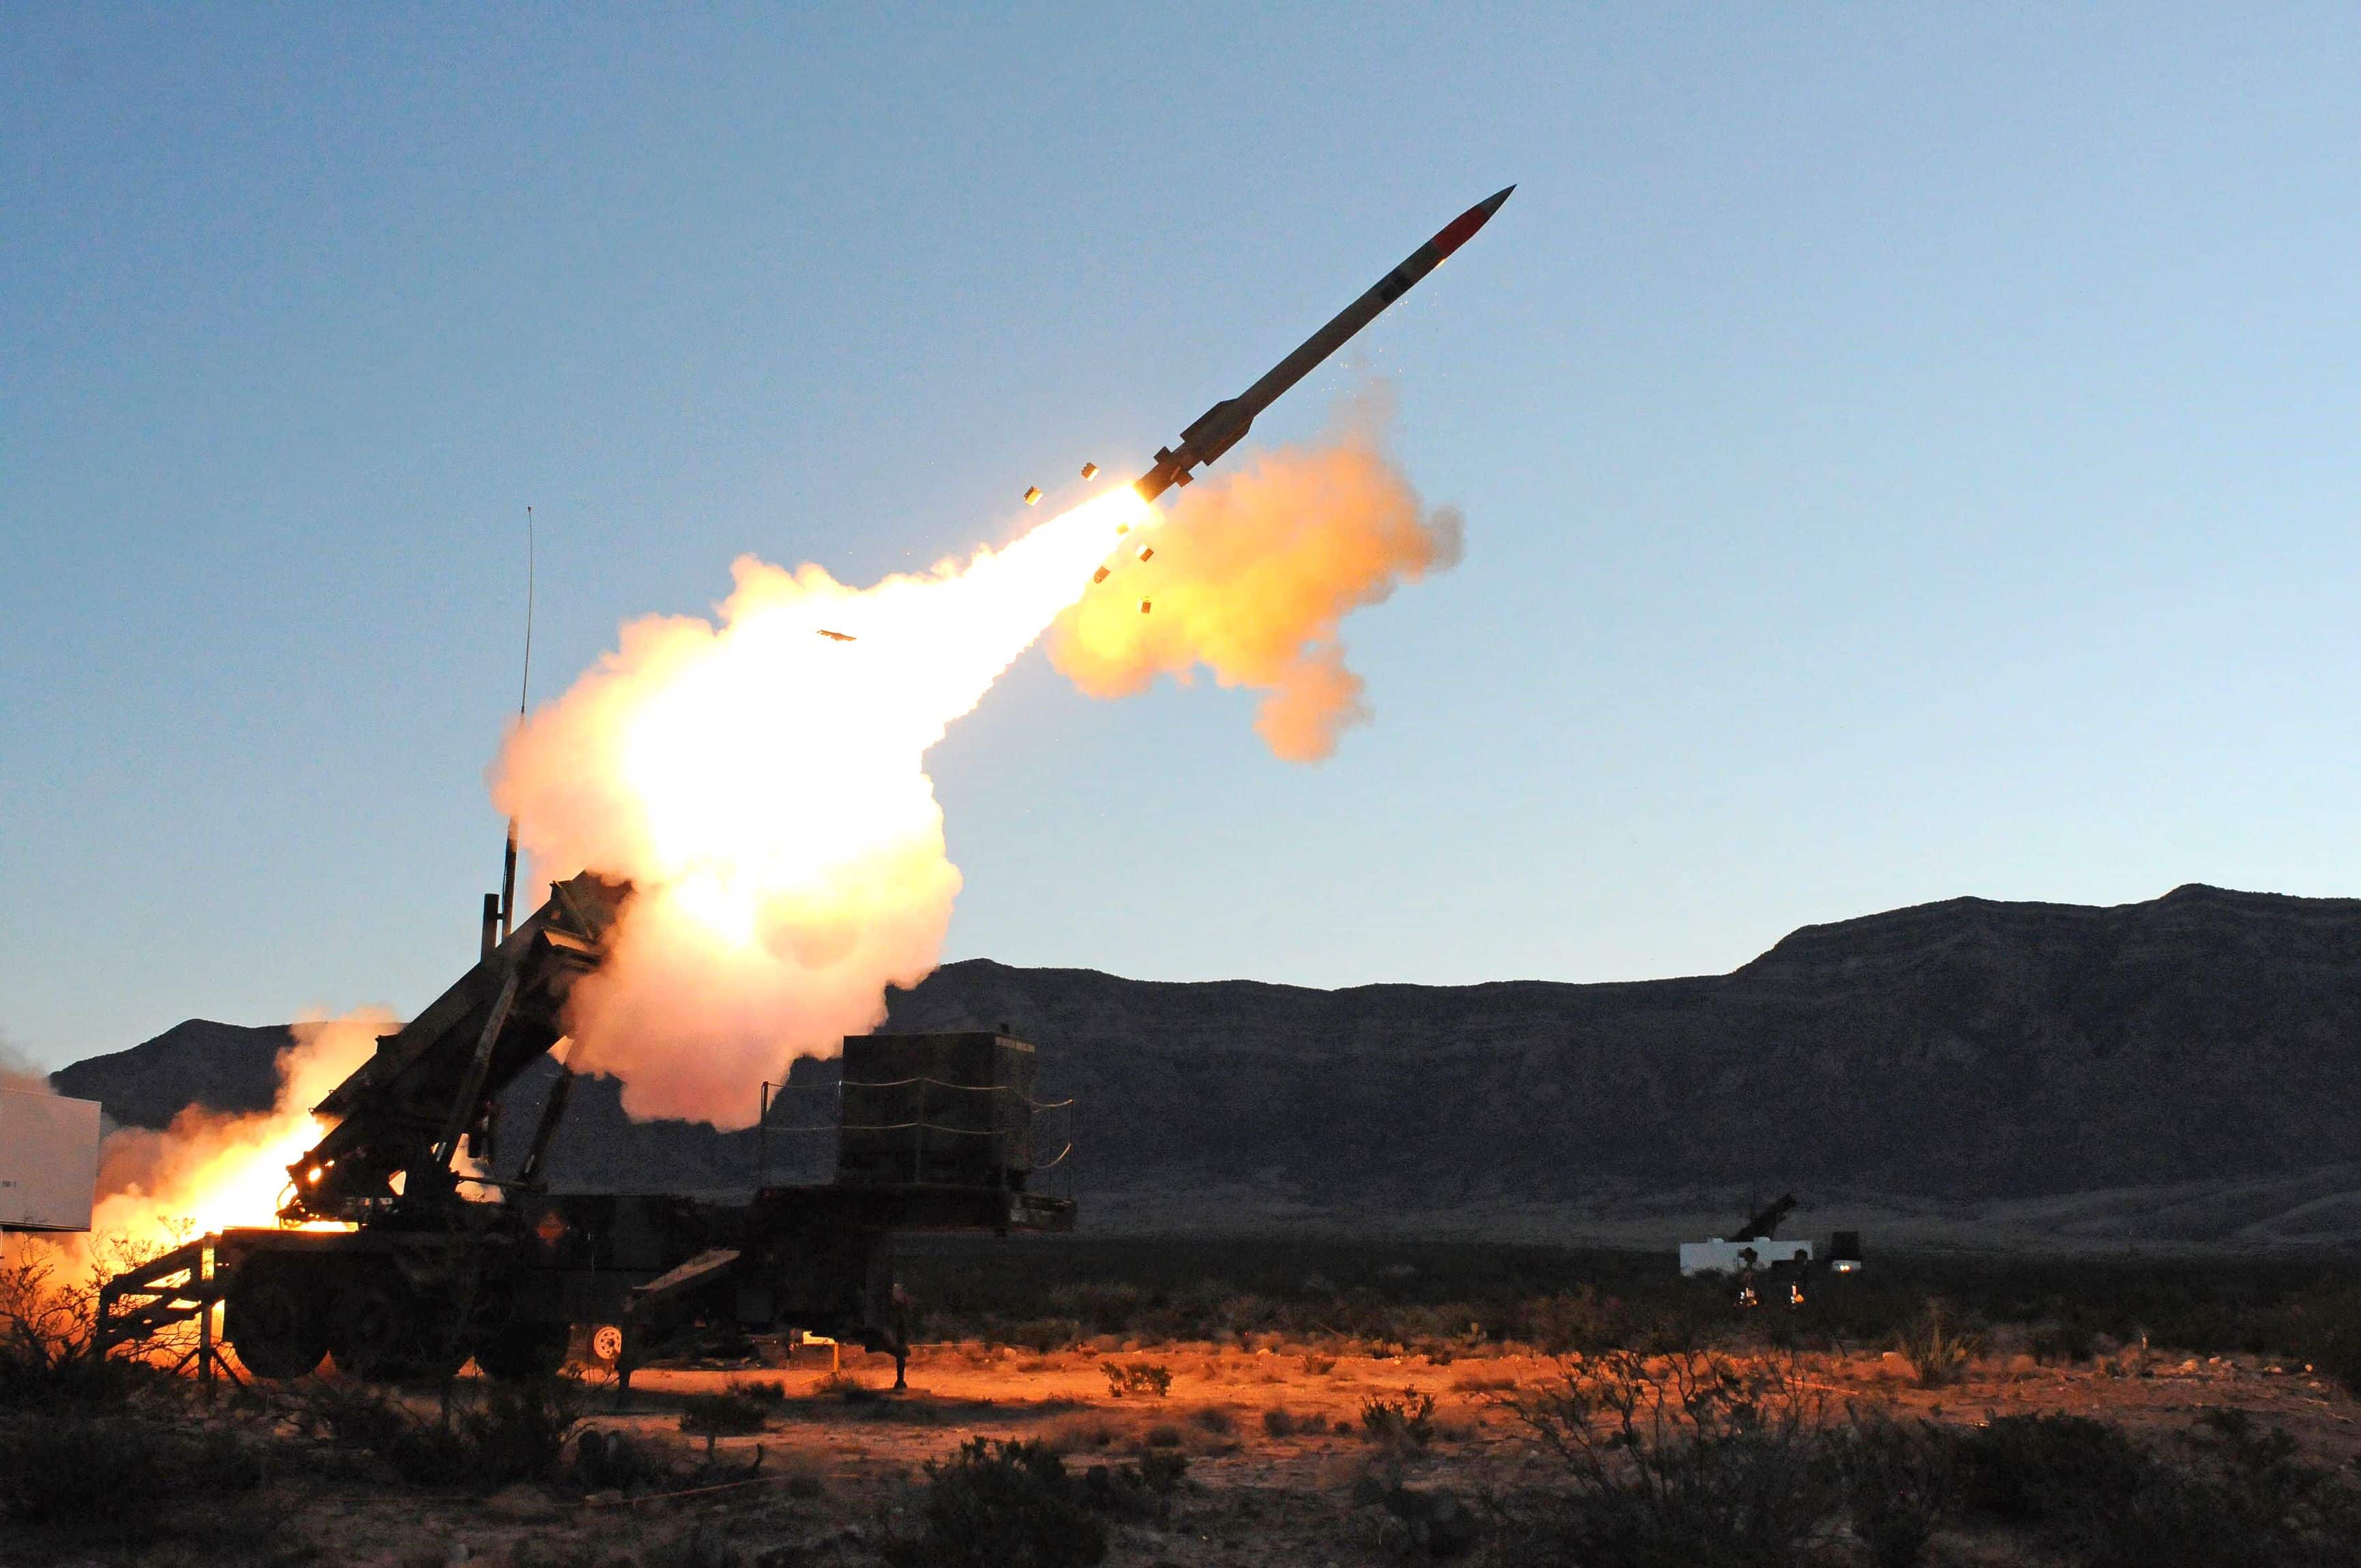 The Army test fires a Patriot missile in a recent test. The Patriot missile system is a ground-based, mobile missile defense interceptor deployed by the United States to detect, track and engage unmanned aerial vehicles, cruise missiles, and short-range and tactical ballistic missiles.